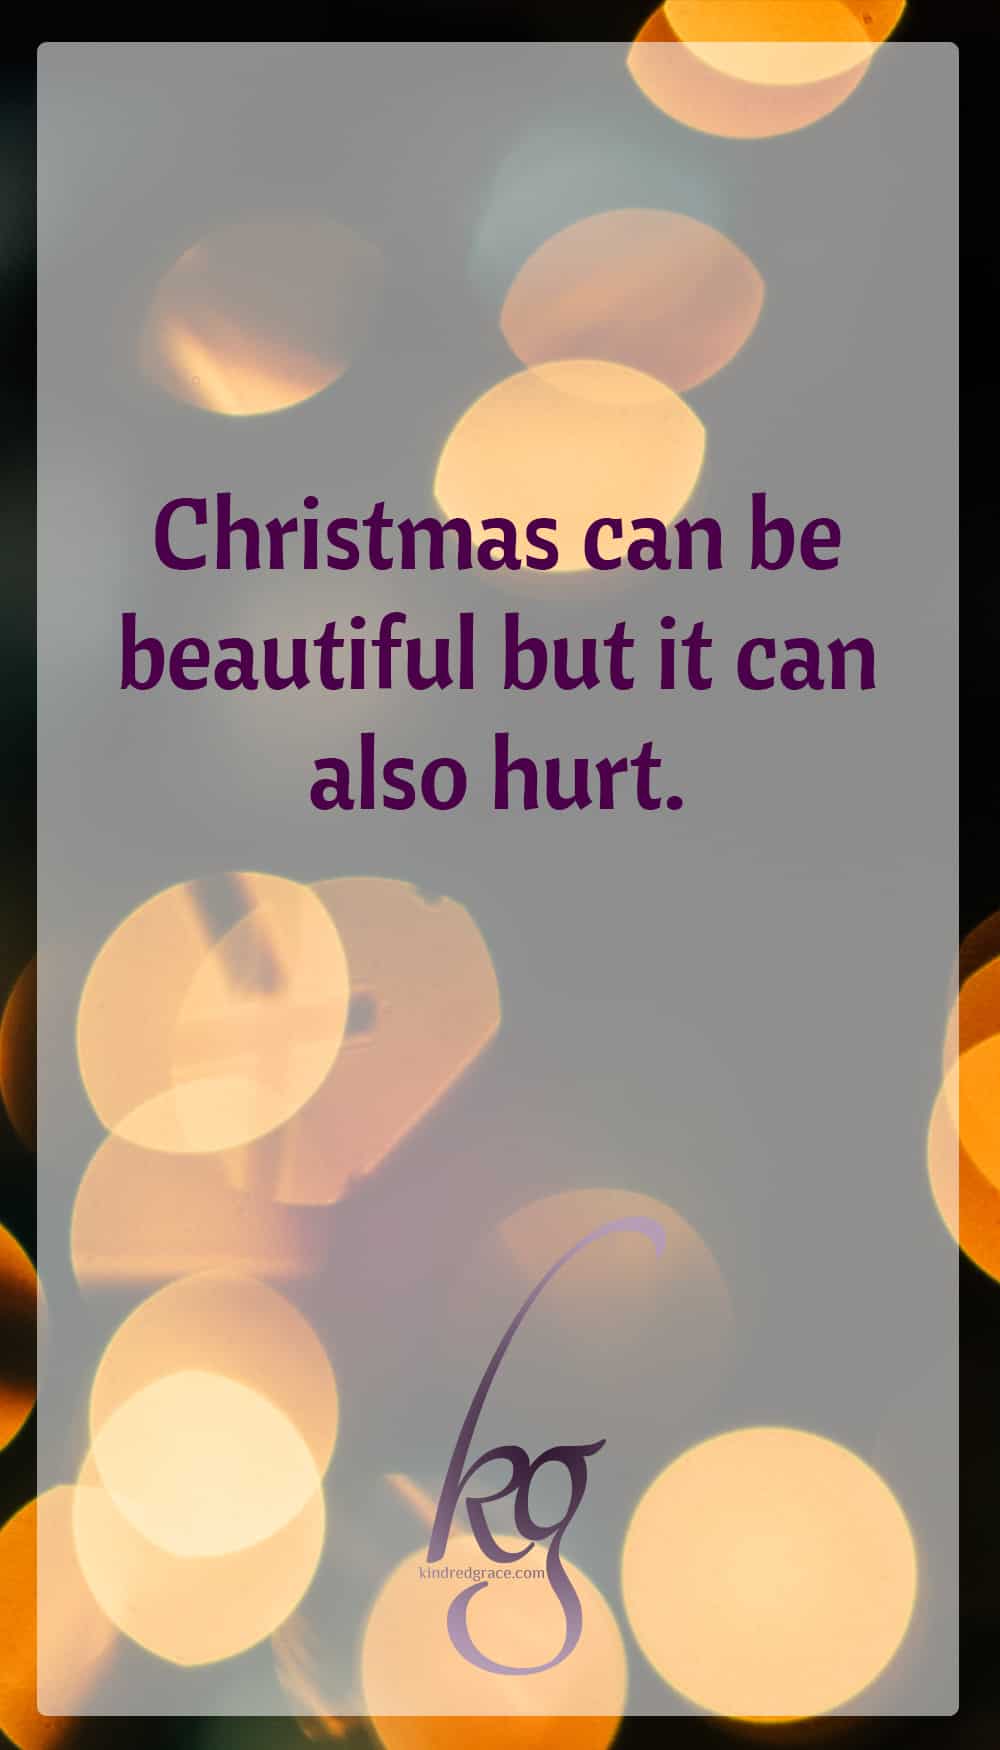 Christmas can be beautiful, but it can also hurt. We want to it to be a time of overwhelming love, but we fail to be loving or someone fails to love us. We want to give, but there isn’t enough. We want to feel secure, but there is no job waiting for us in the new year. We wanted this Christmas to be the one we finally get to share with a man or a new baby or that loved one who keeps insisting that God is irrelevant, and instead we’re alone. We want to feel peace, but instead we carry regrets. via @KindredGrace